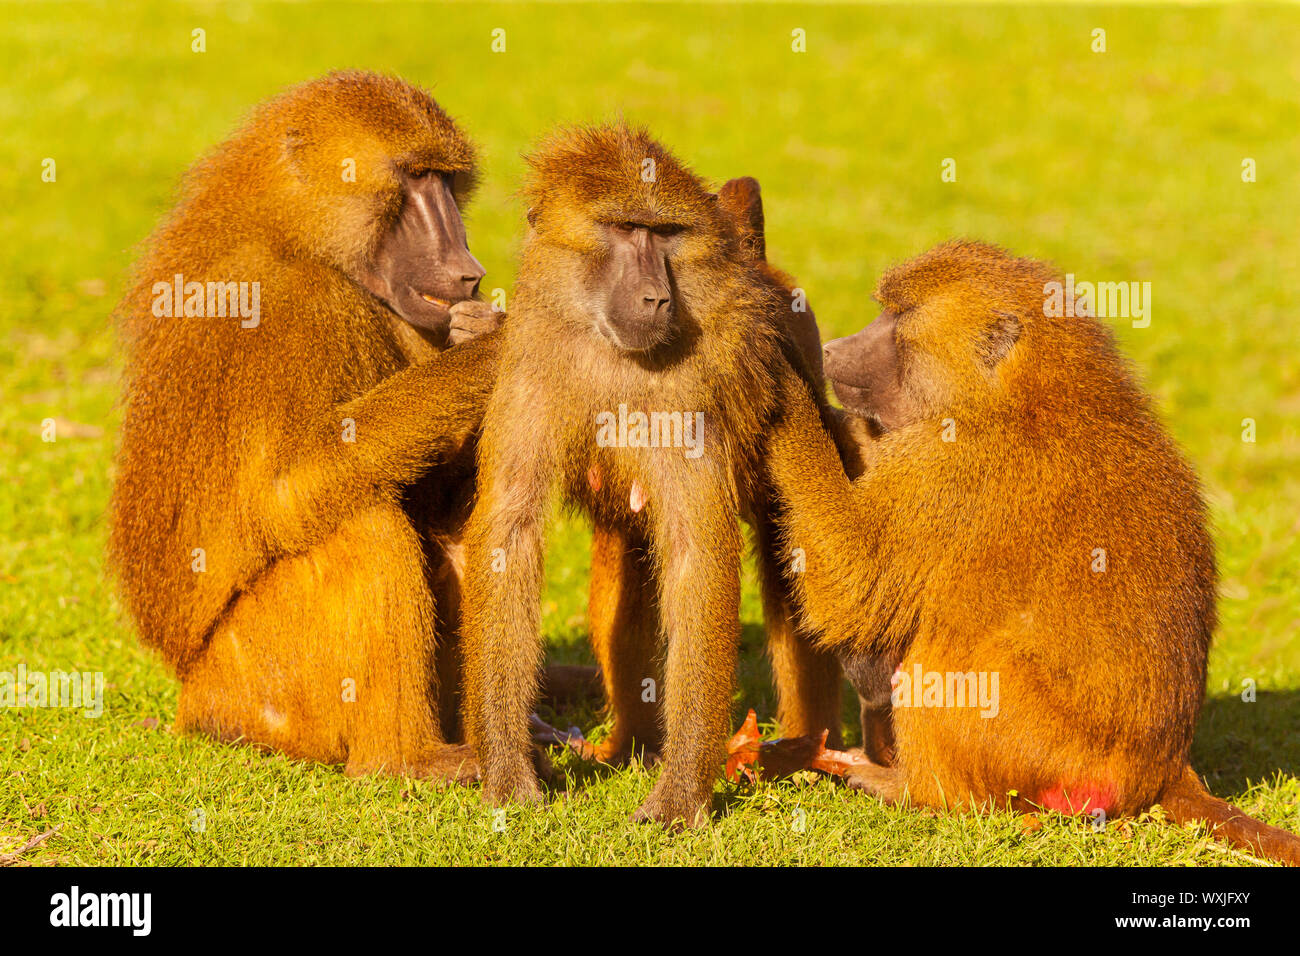 Guinea Baboon (Papio papio) Family Together Grooming each other Stock Photo